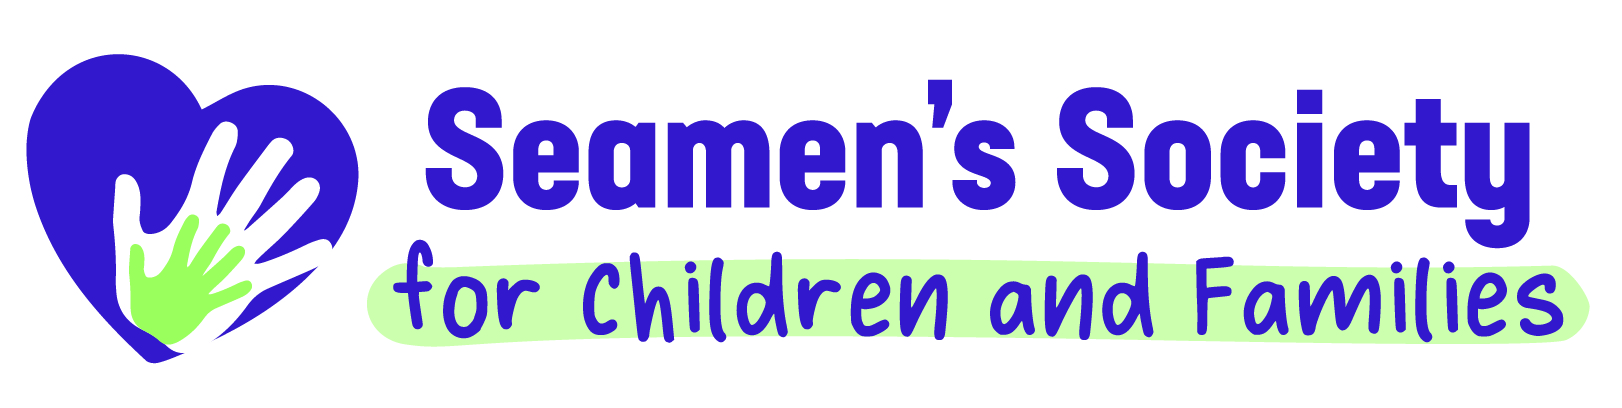 Seamen's Society for Children and Families